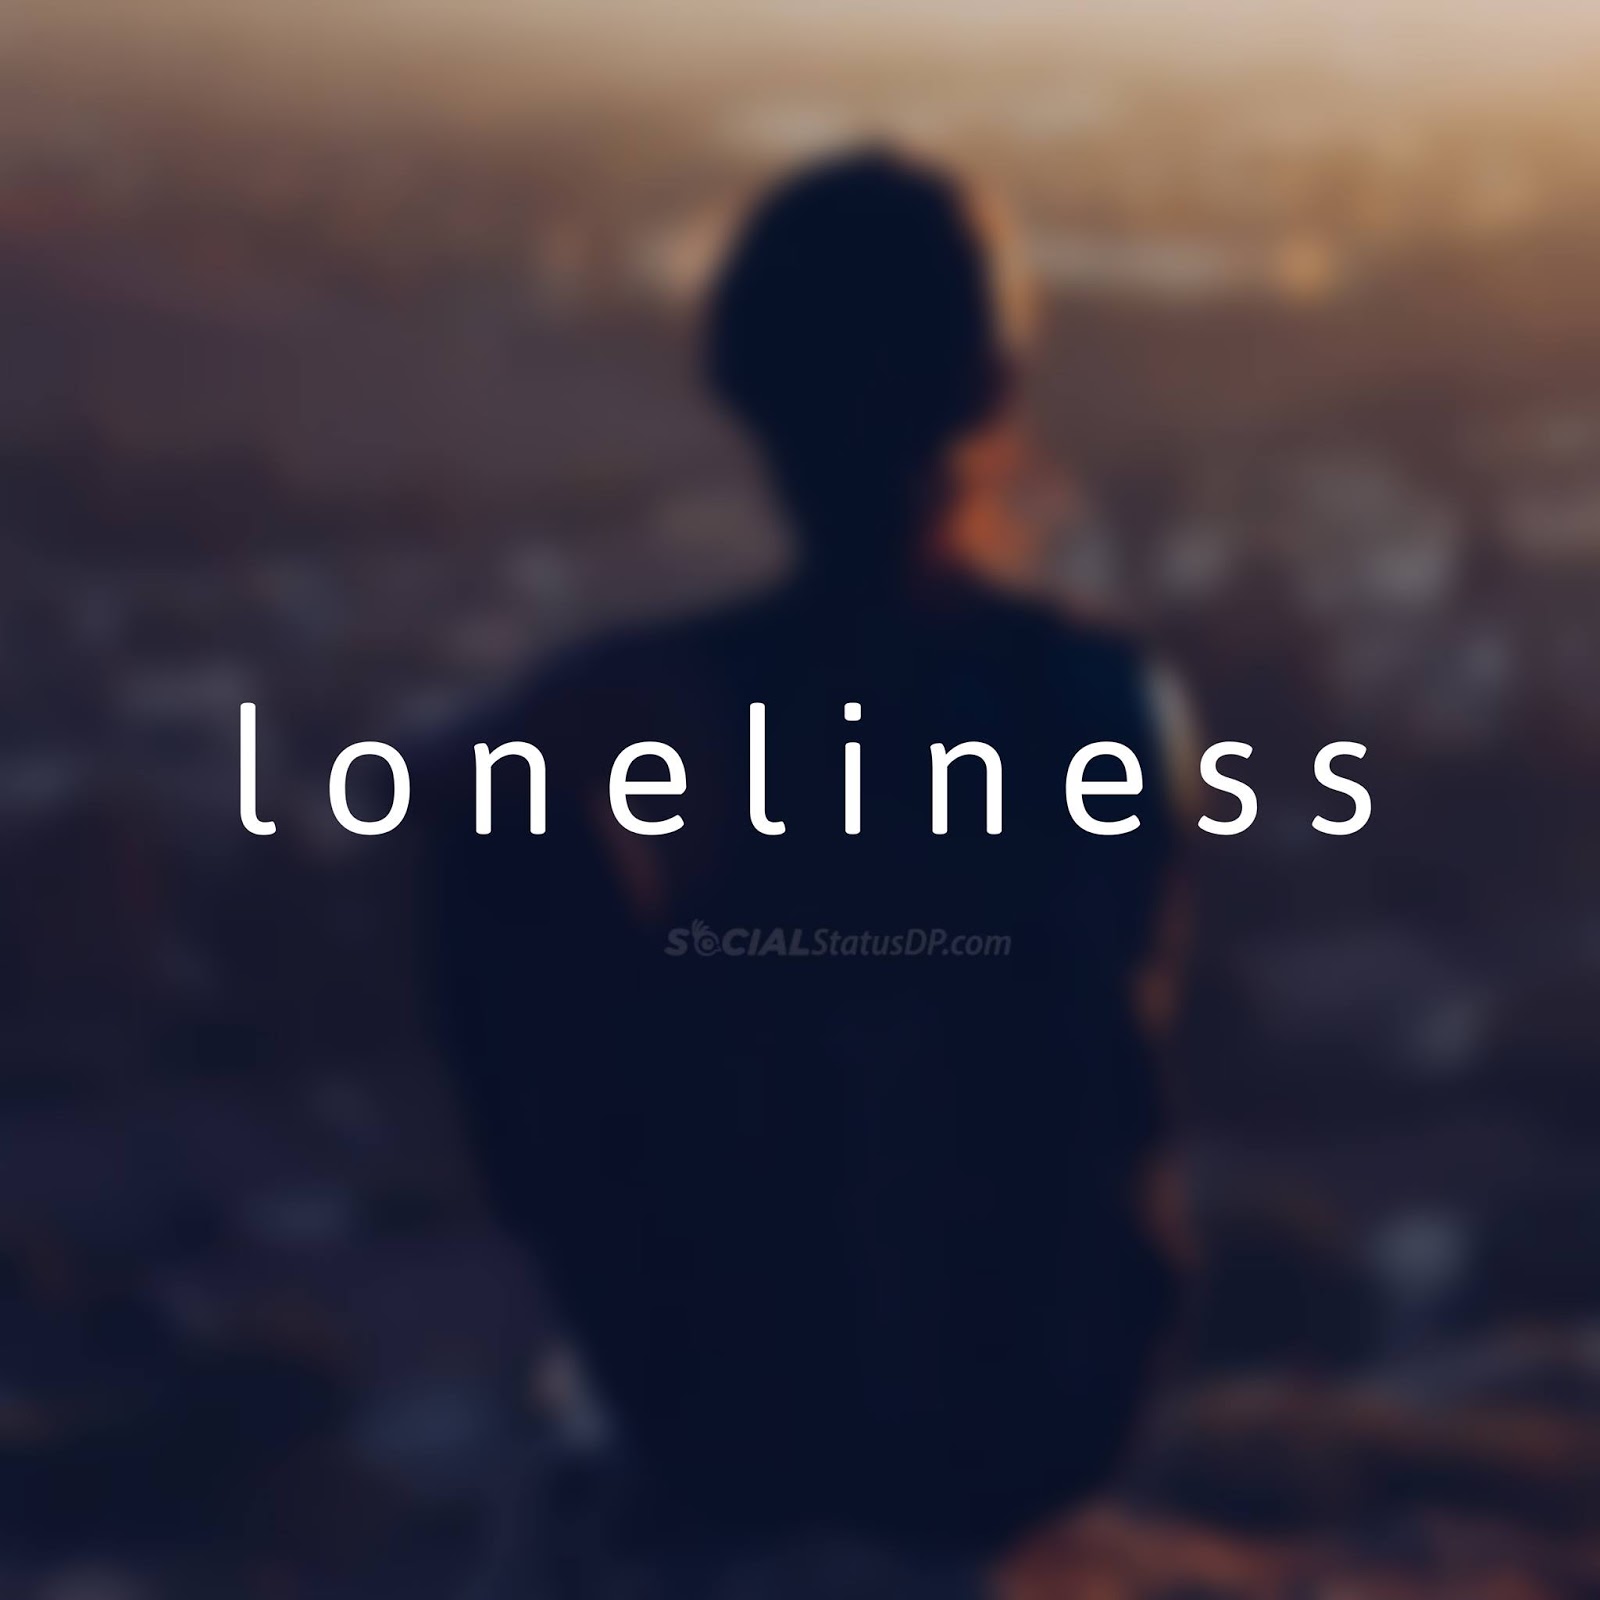 Best Whatsapp Lonely Status, Alone Quotes, Loneliness - Fall In Love When You Are Ready Not When You Are Lonely - HD Wallpaper 